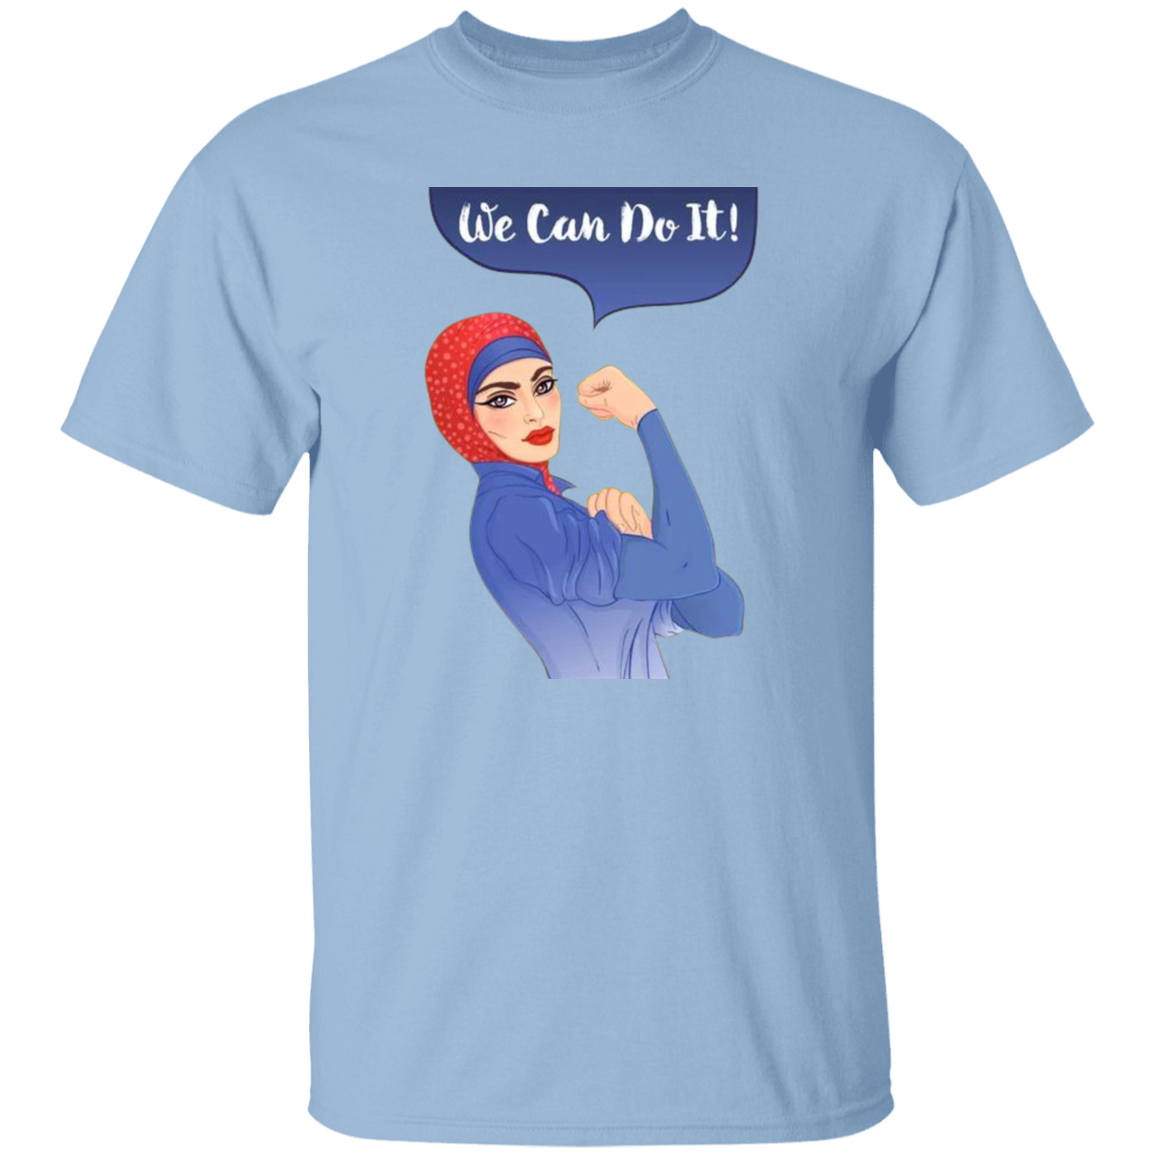 We Can Do It 5.3 oz. T-Shirt